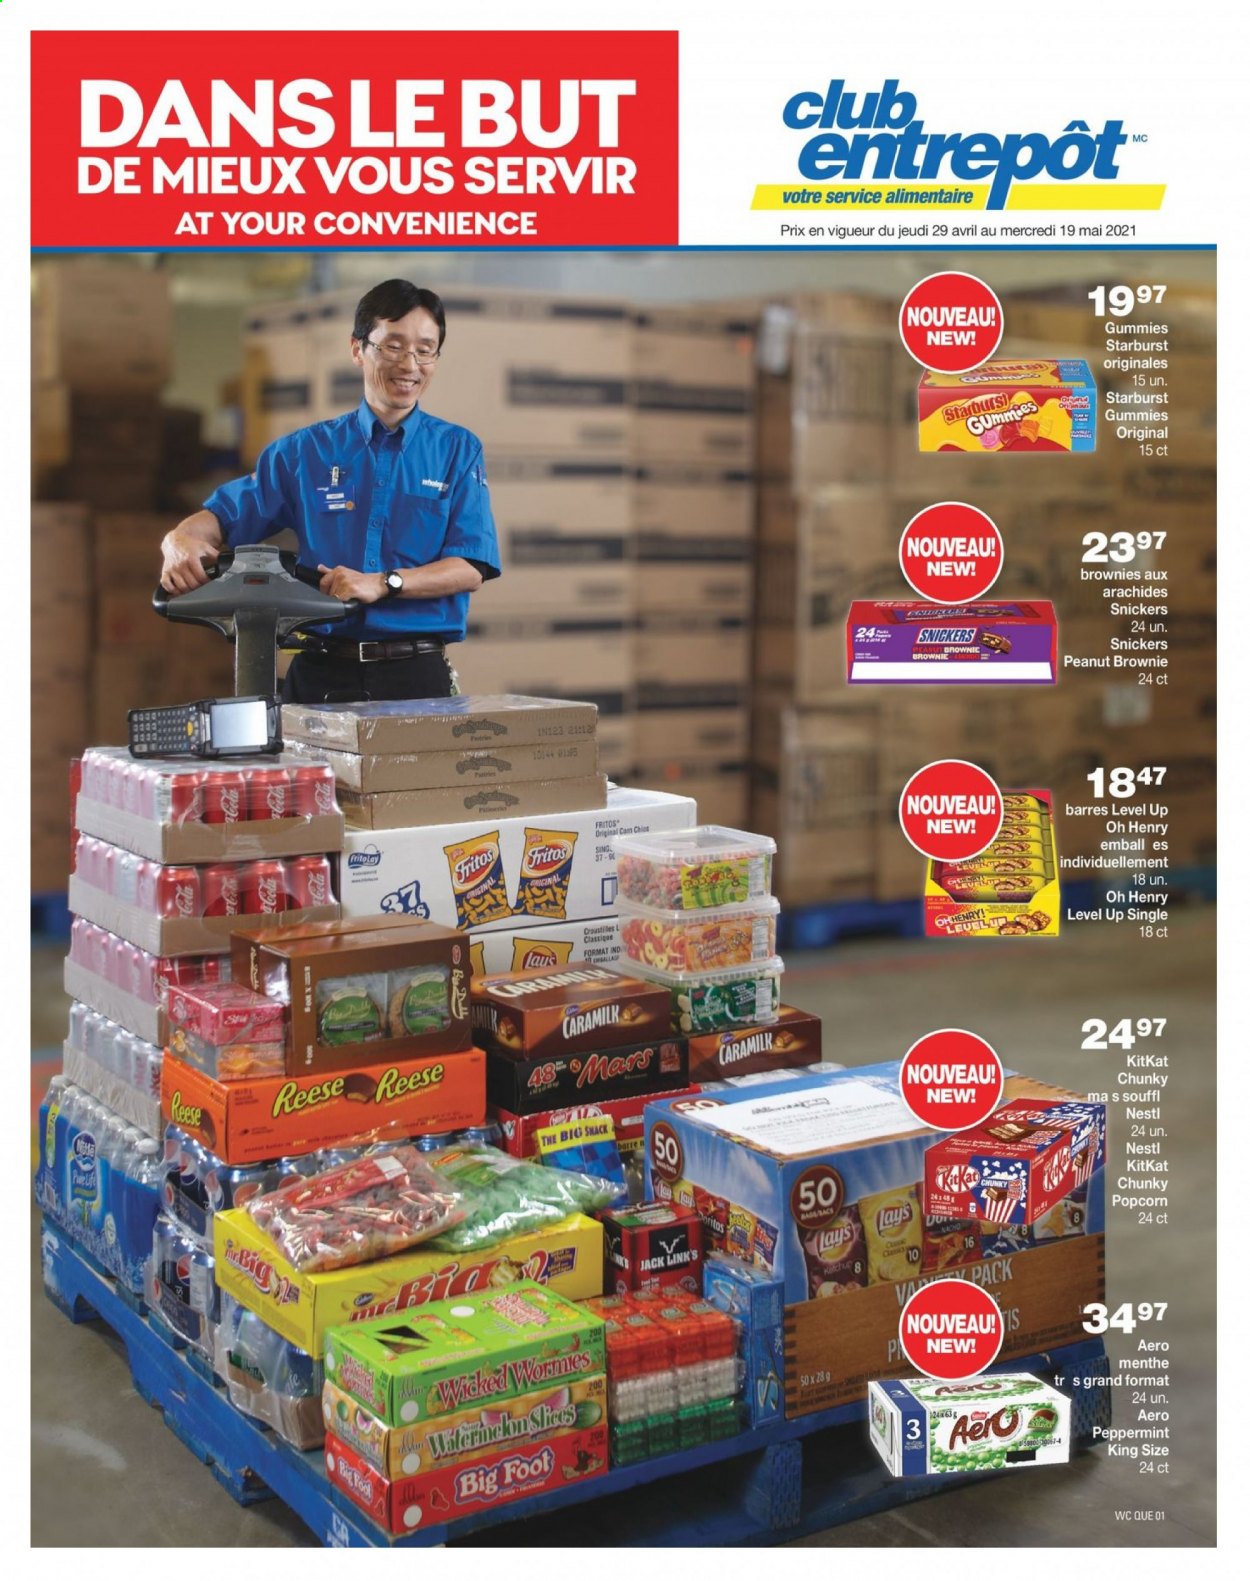 thumbnail - Wholesale Club Flyer - April 29, 2021 - May 19, 2021 - Sales products - brownies, Ola, Snickers, Mars, KitKat, Starburst, Fritos, Lay’s, popcorn, Frito-Lay, Jack Link's, cocoa, pot. Page 1.